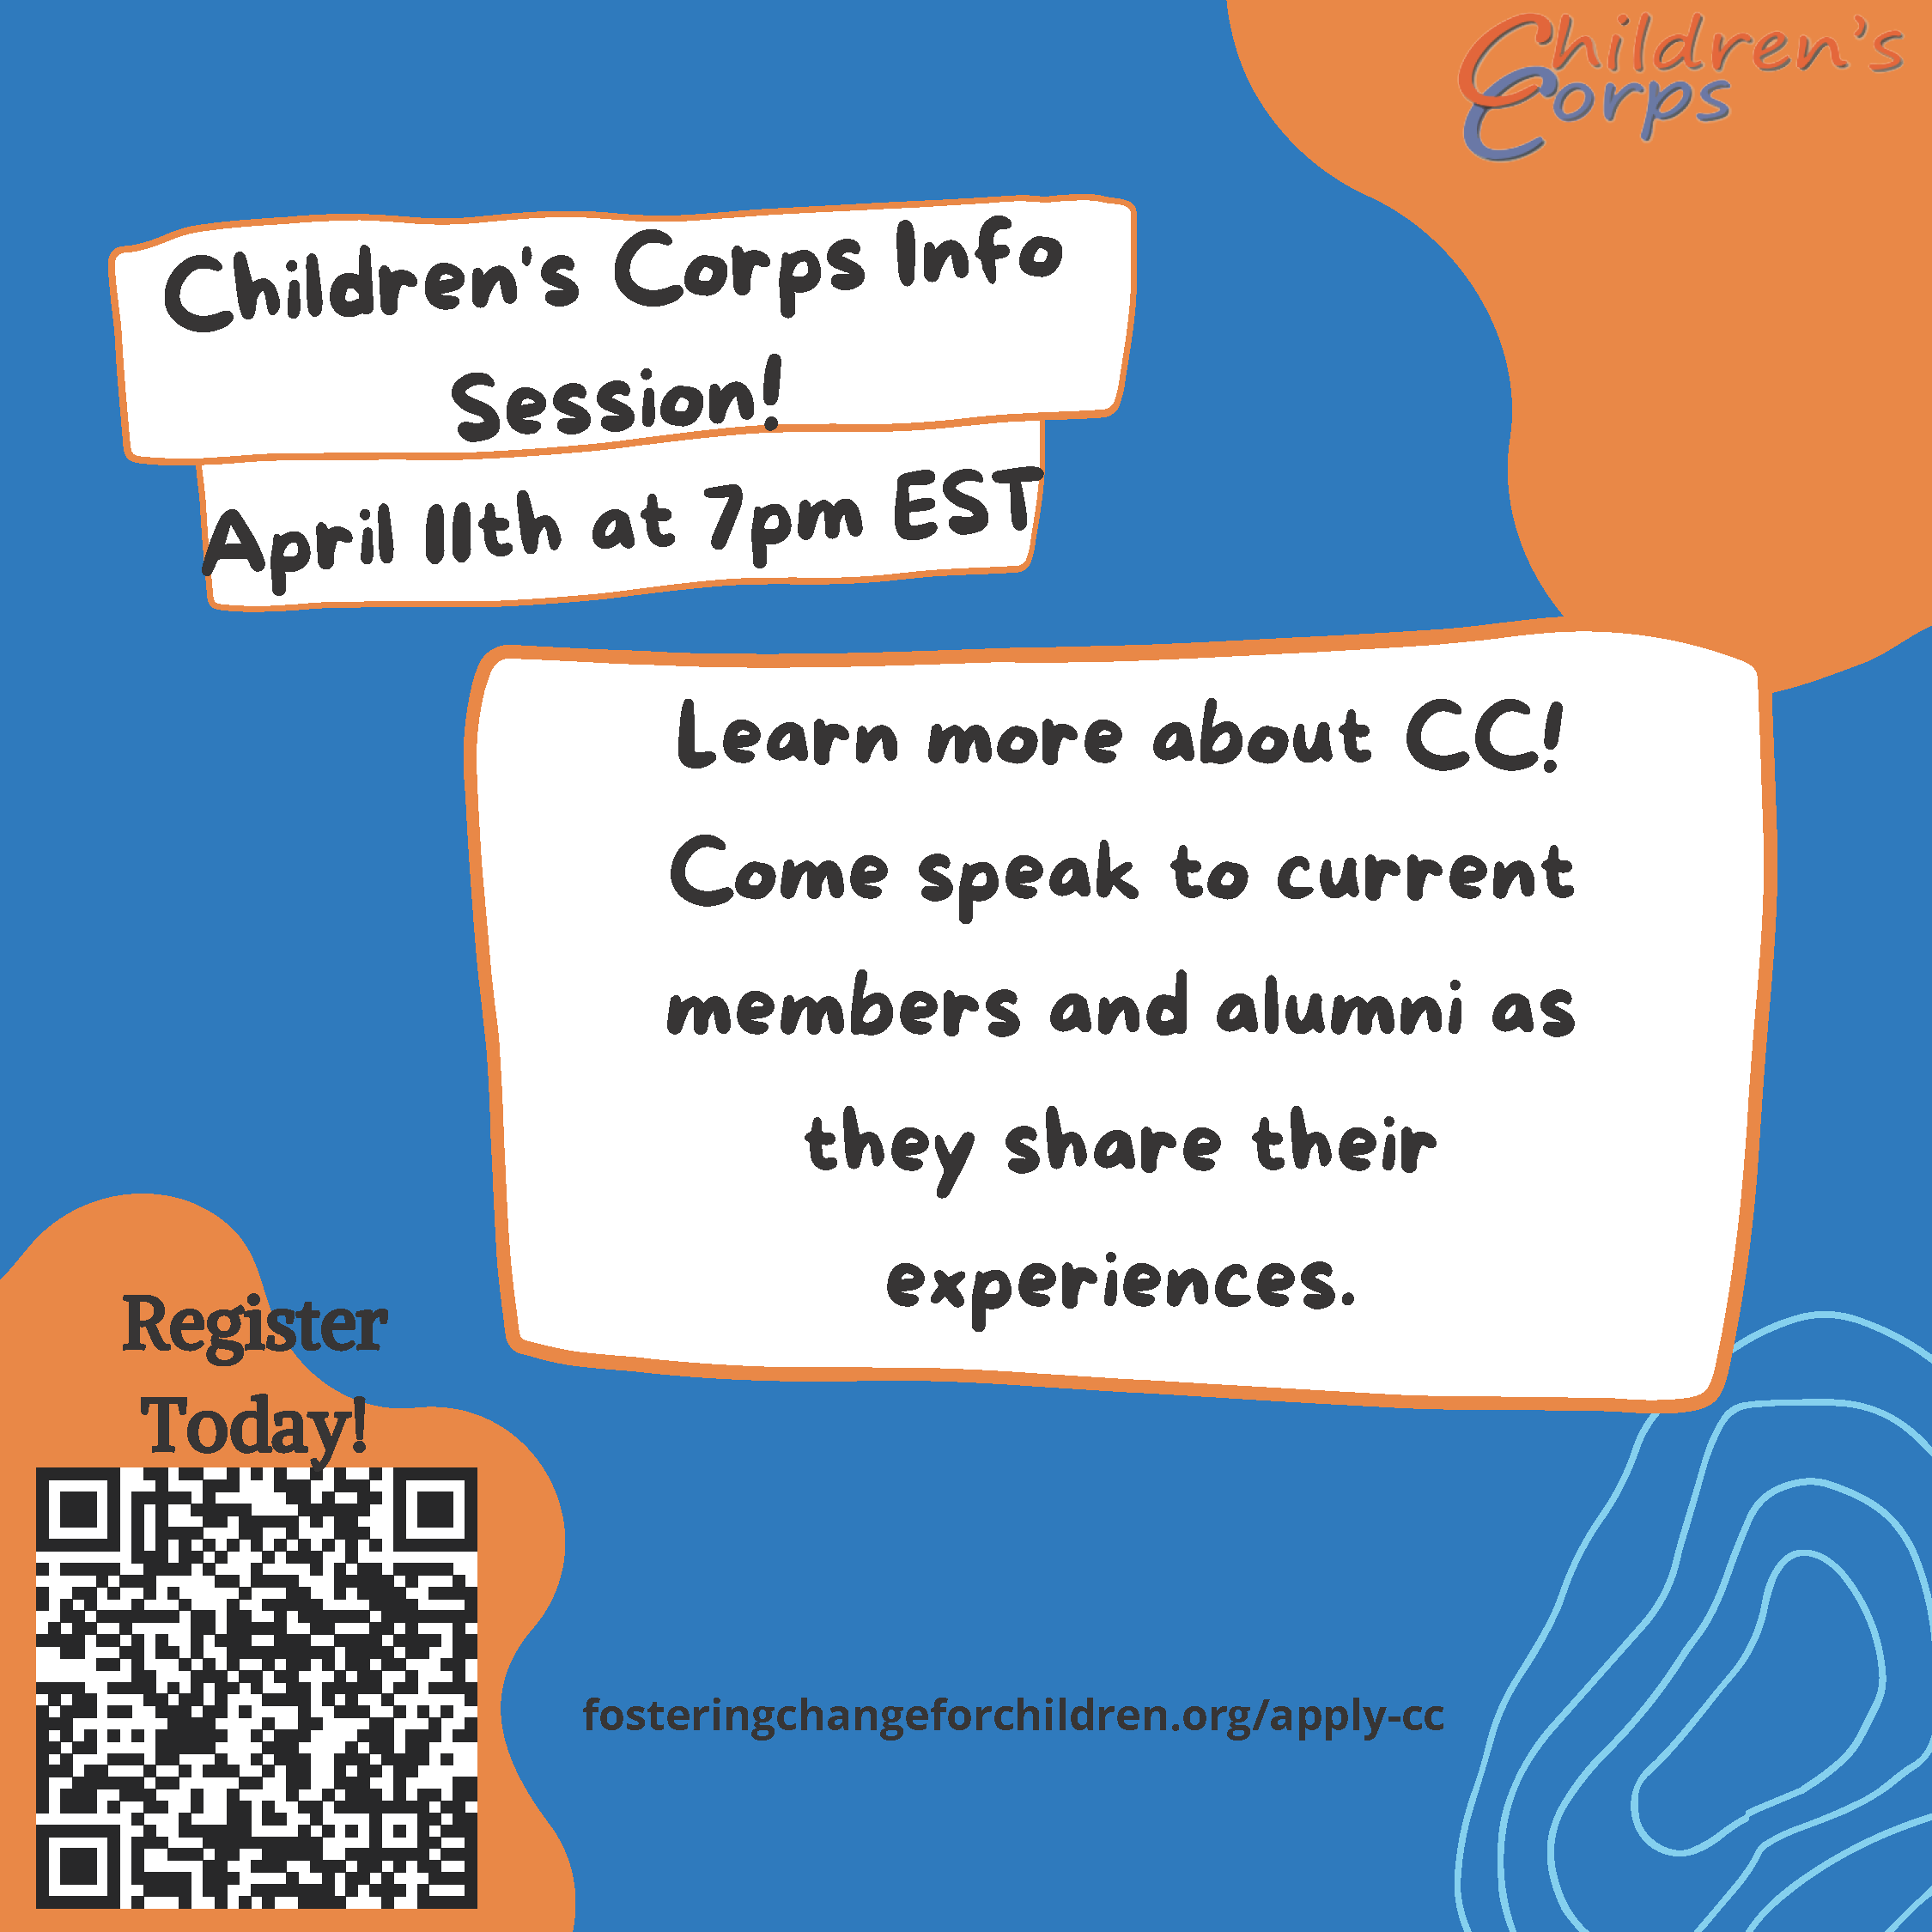 Flyer regarding upcoming virtual information session with Children's Corp